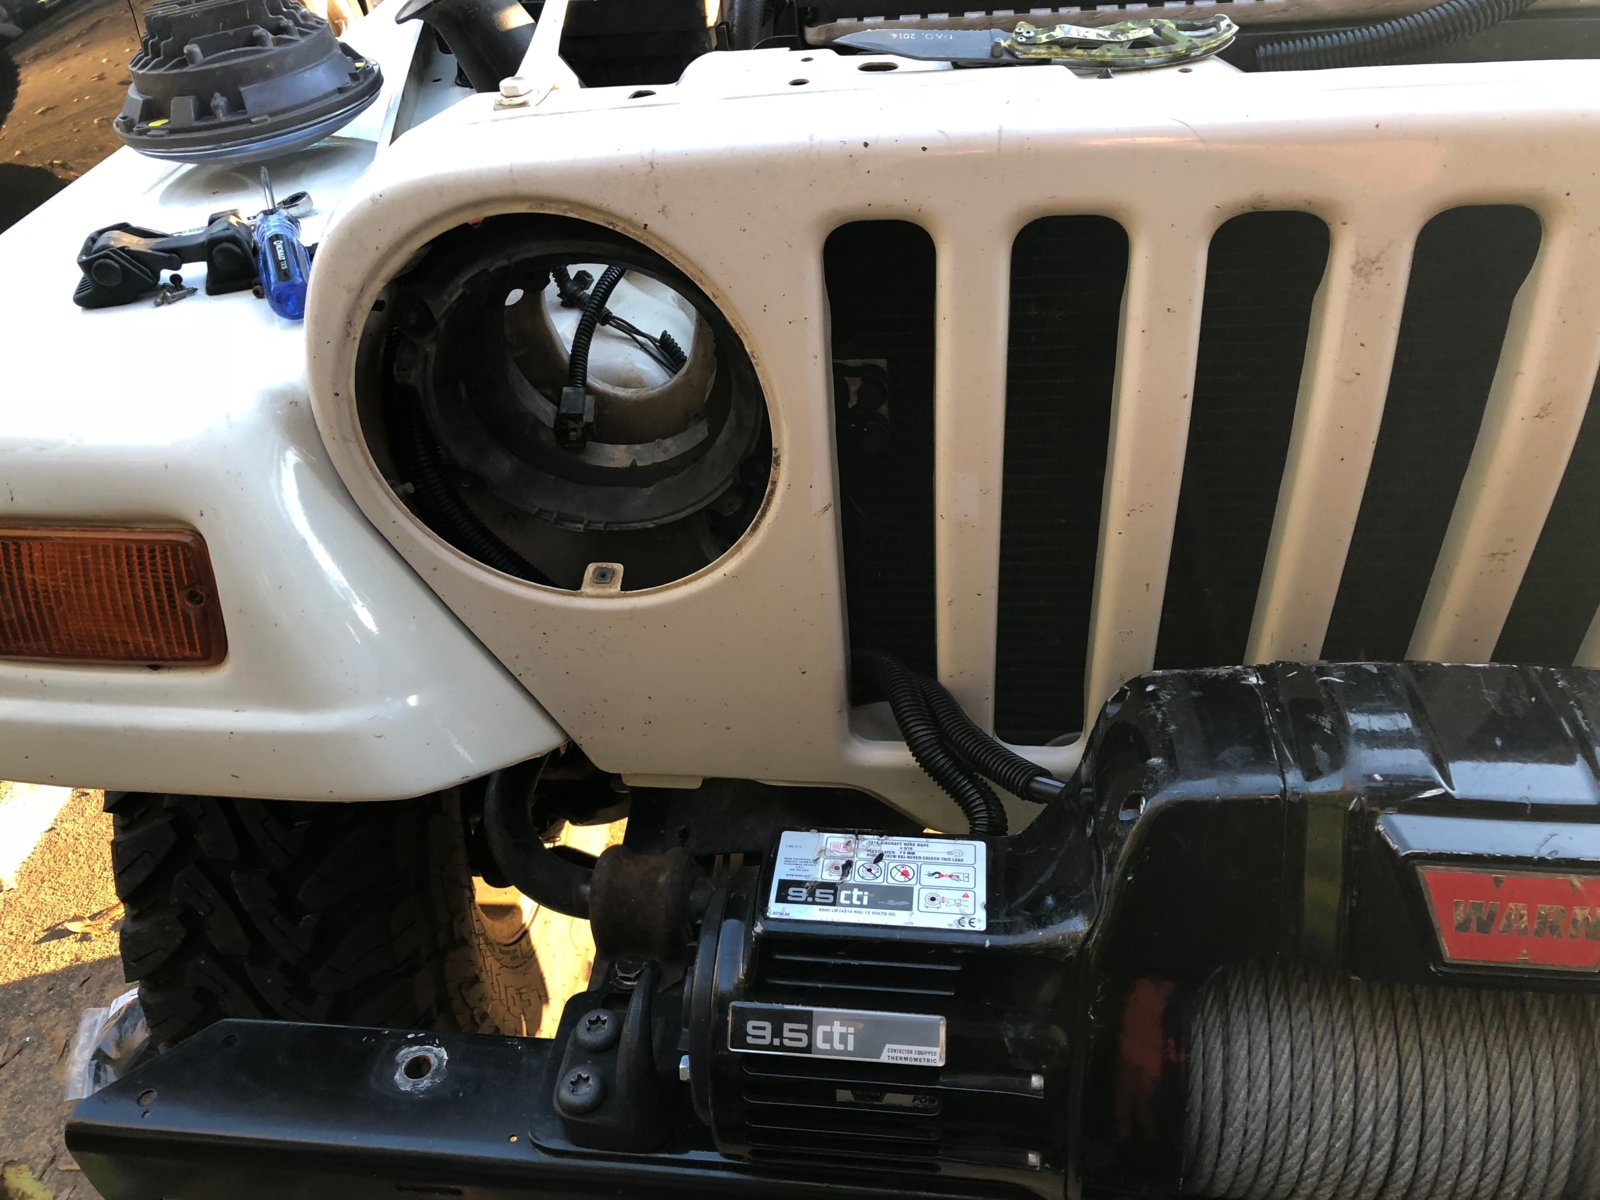 Wiring A Winch On A Jeep from wranglertjforum.com